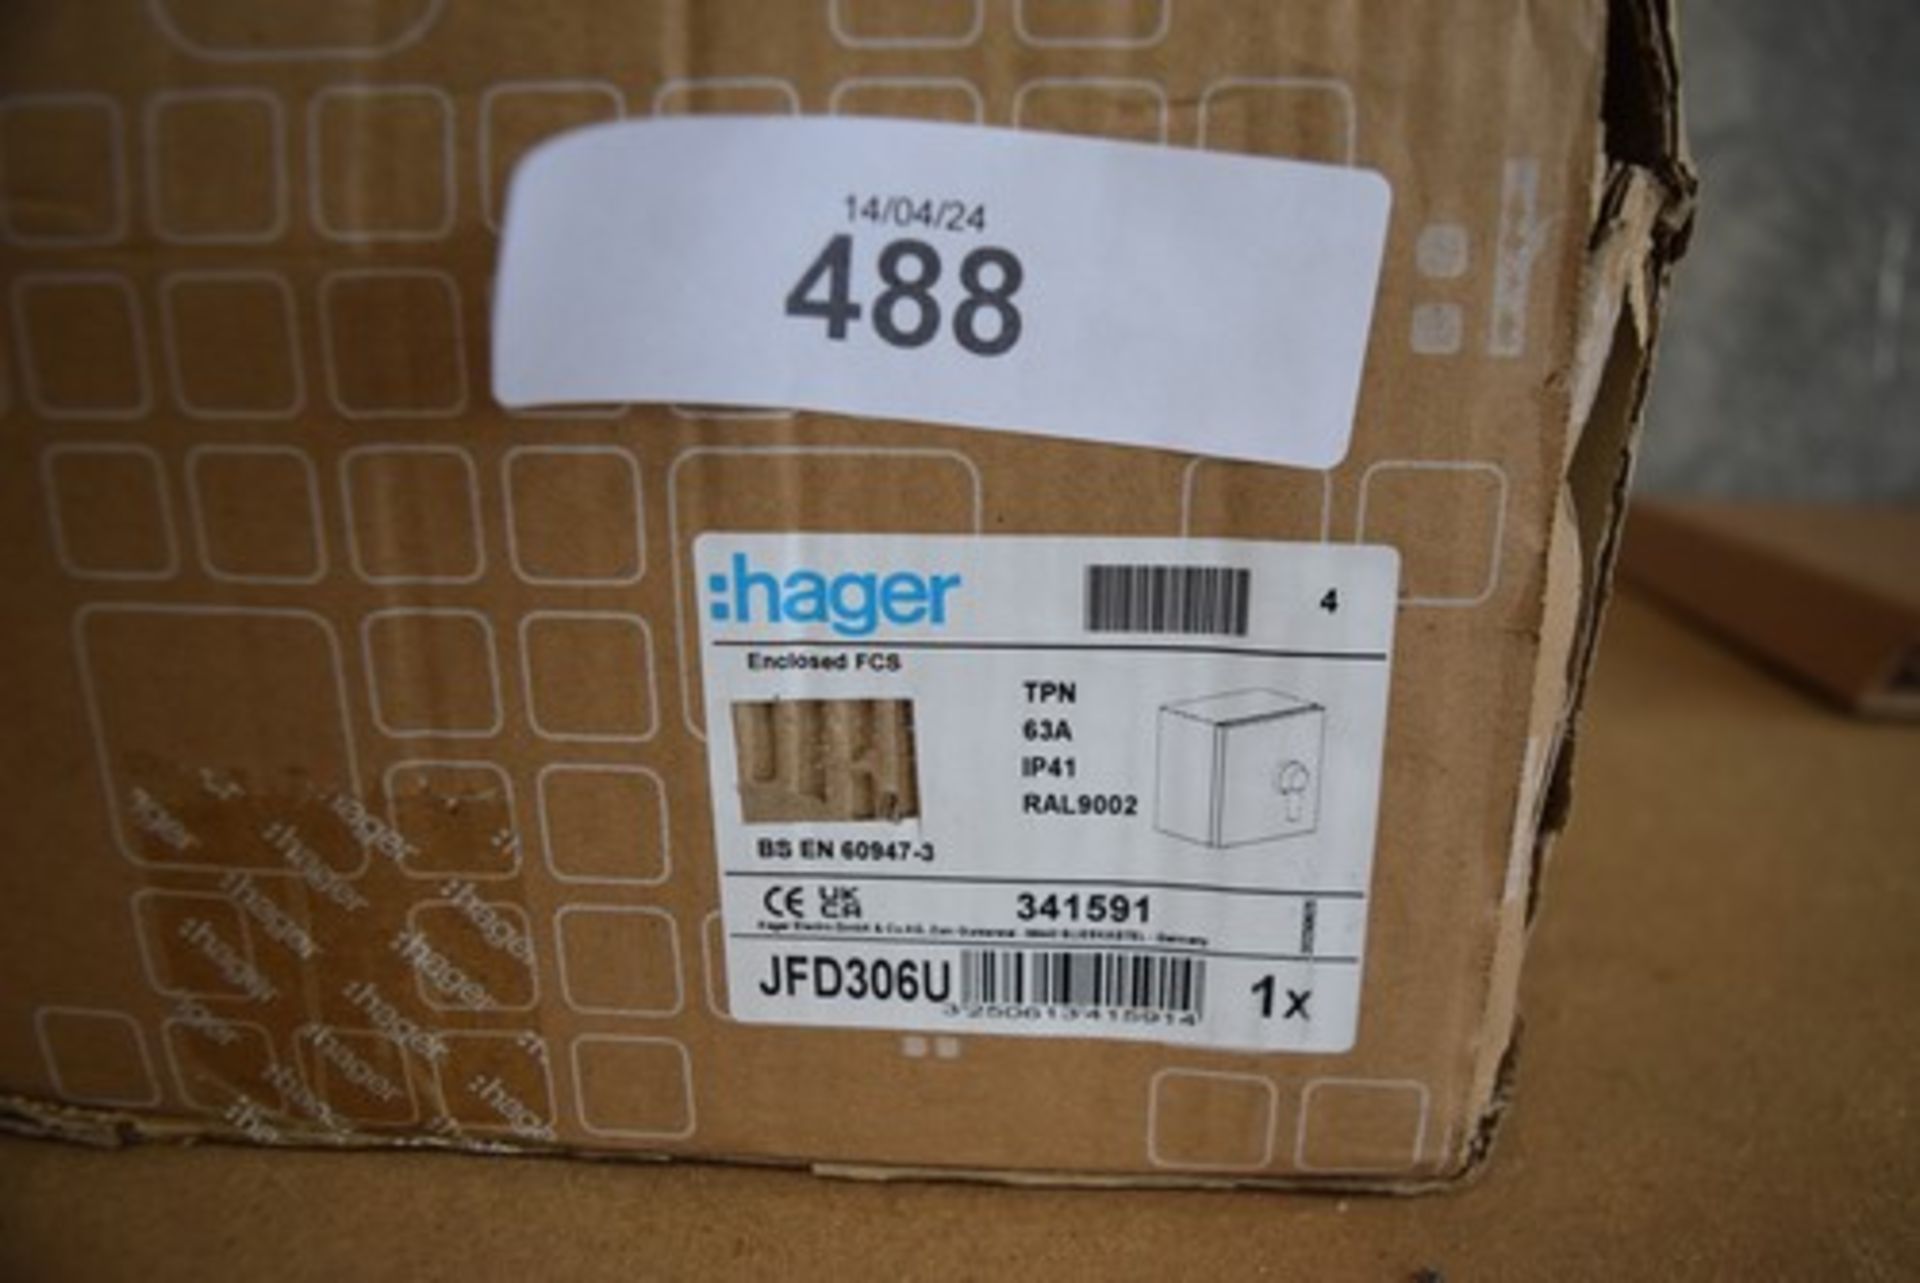 1 x Hager 63A triple pole+ neutral metal fused switch - new in tatty box (TS)